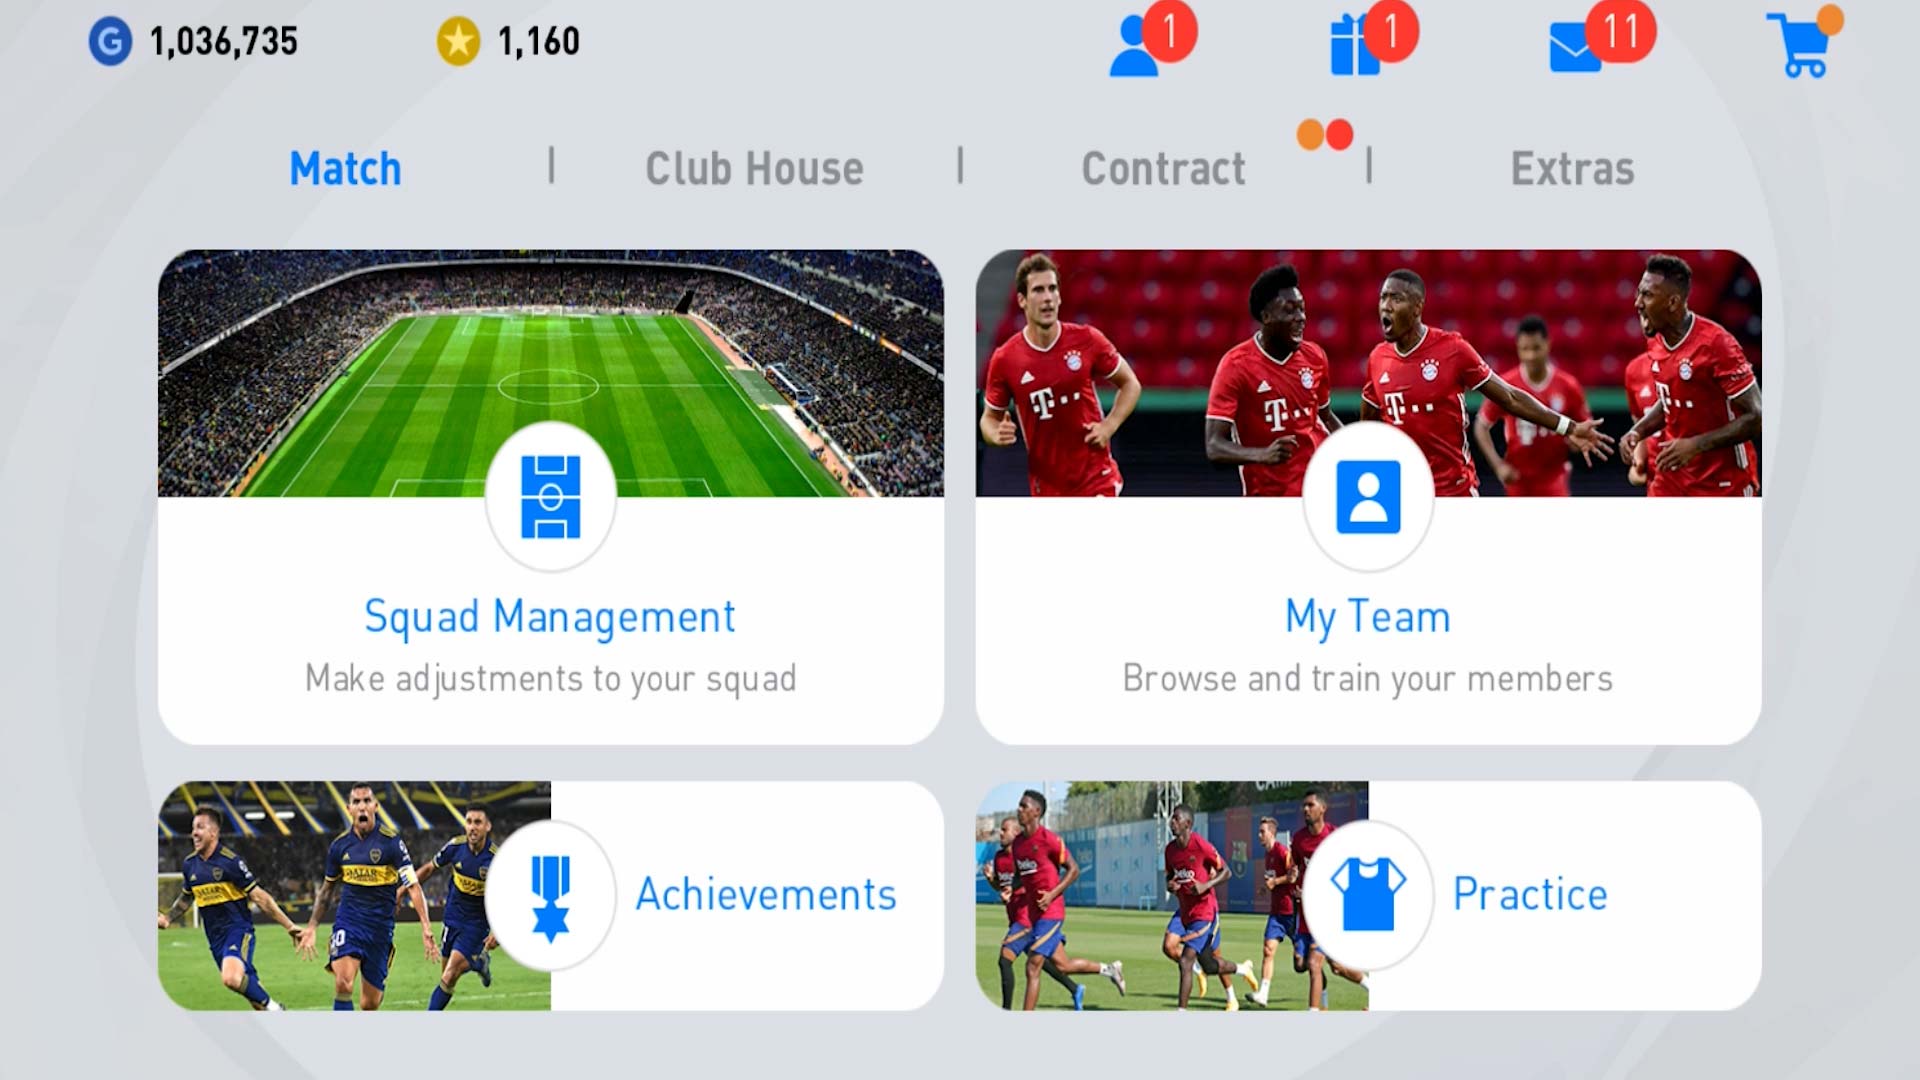 eFootball PES 2021 Mobile V5.1.0 Android Offline New Patch Transfers Update + New Kits Best Graphics